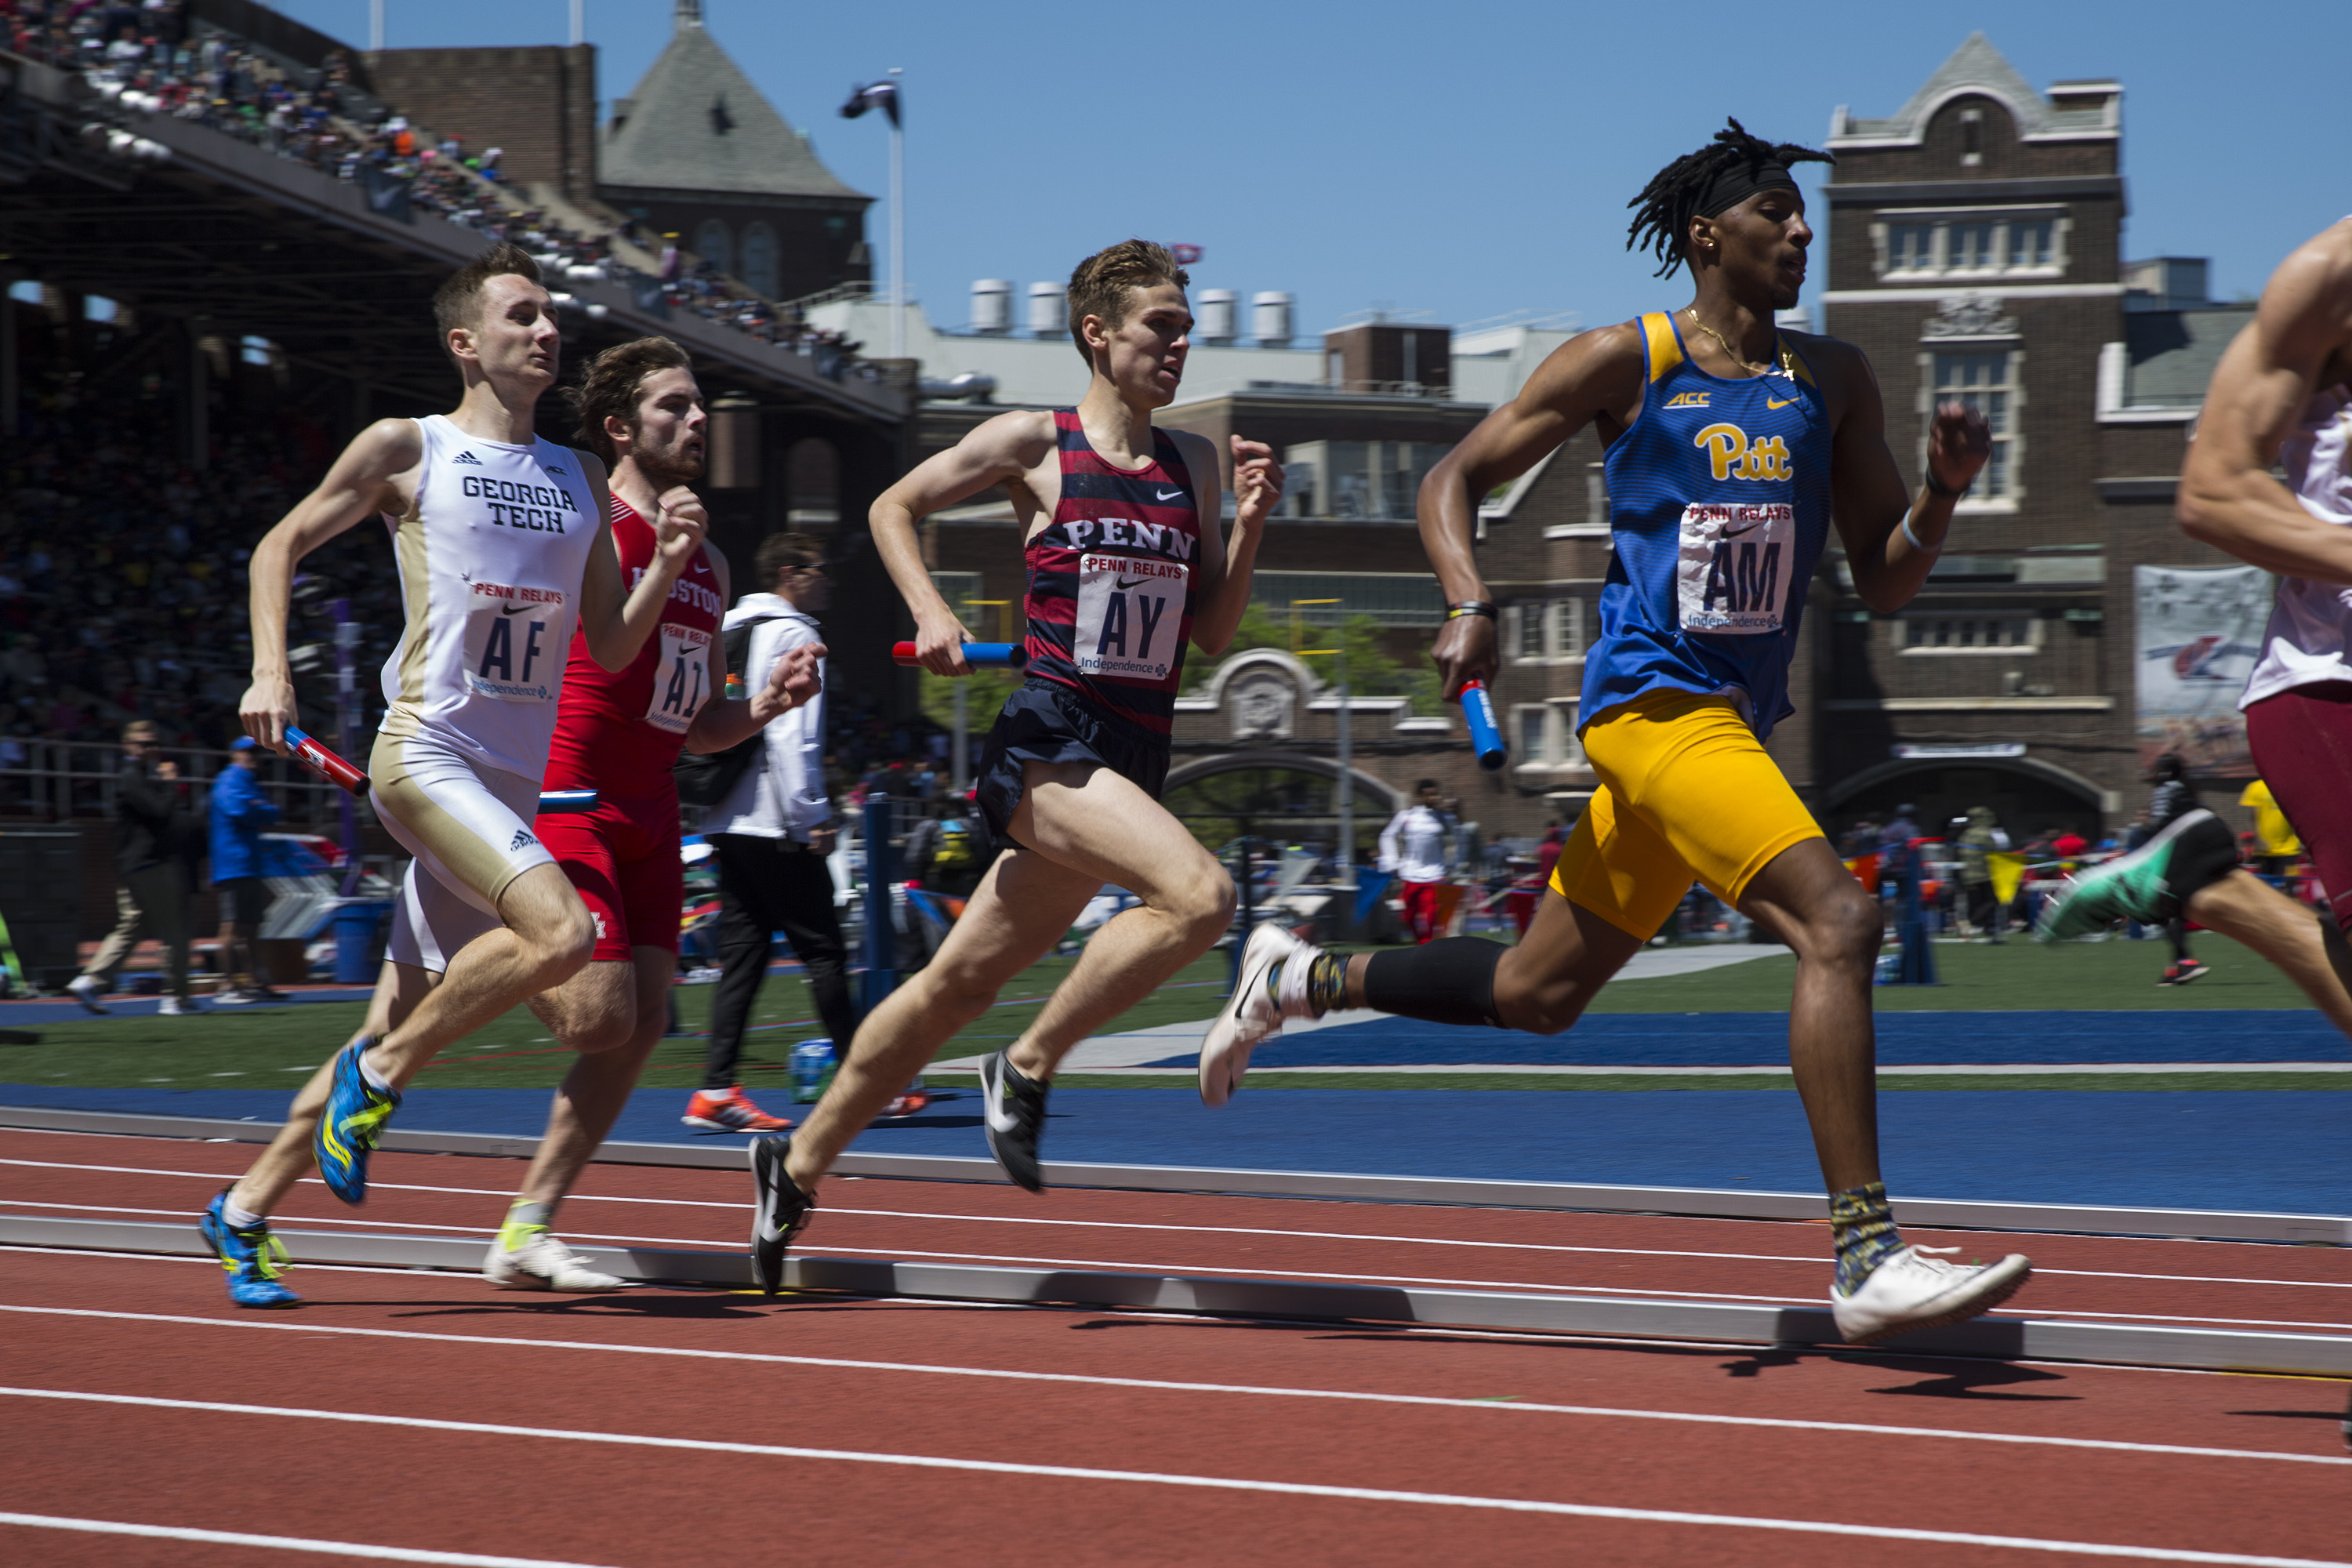 Three days of Penn Relays, for 125 years Penn Today